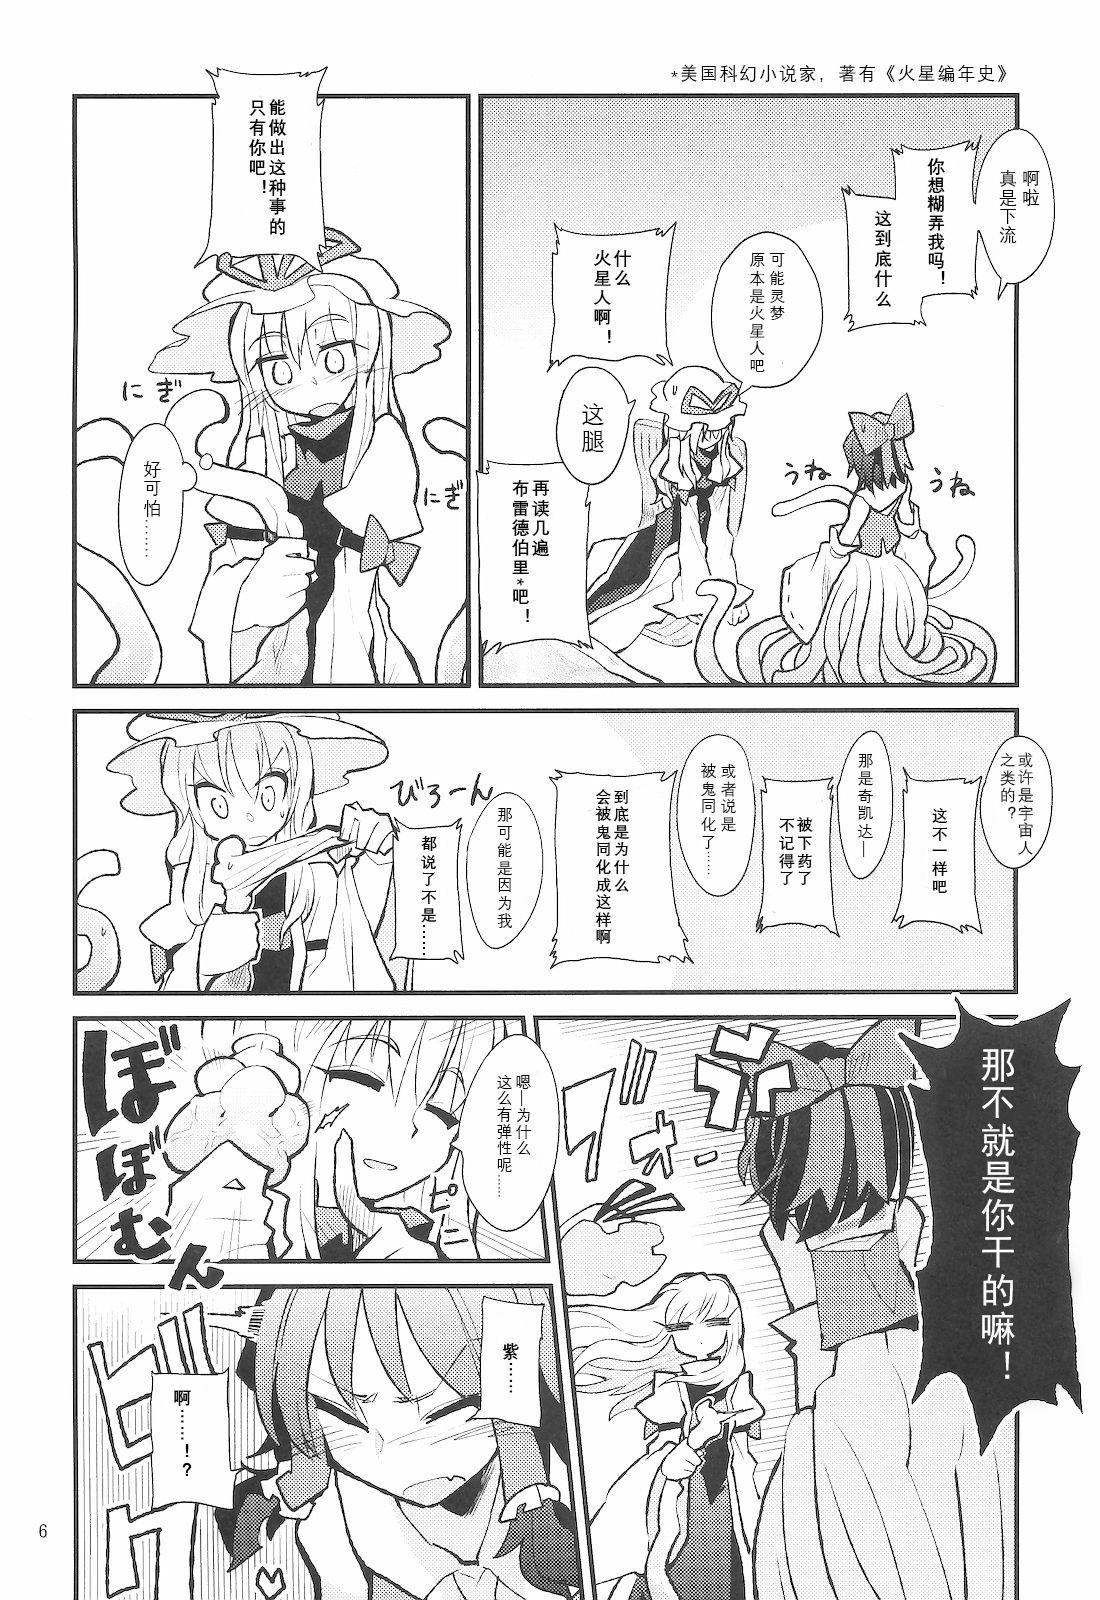 Blowing La Tentacule - Touhou project Doctor - Page 8